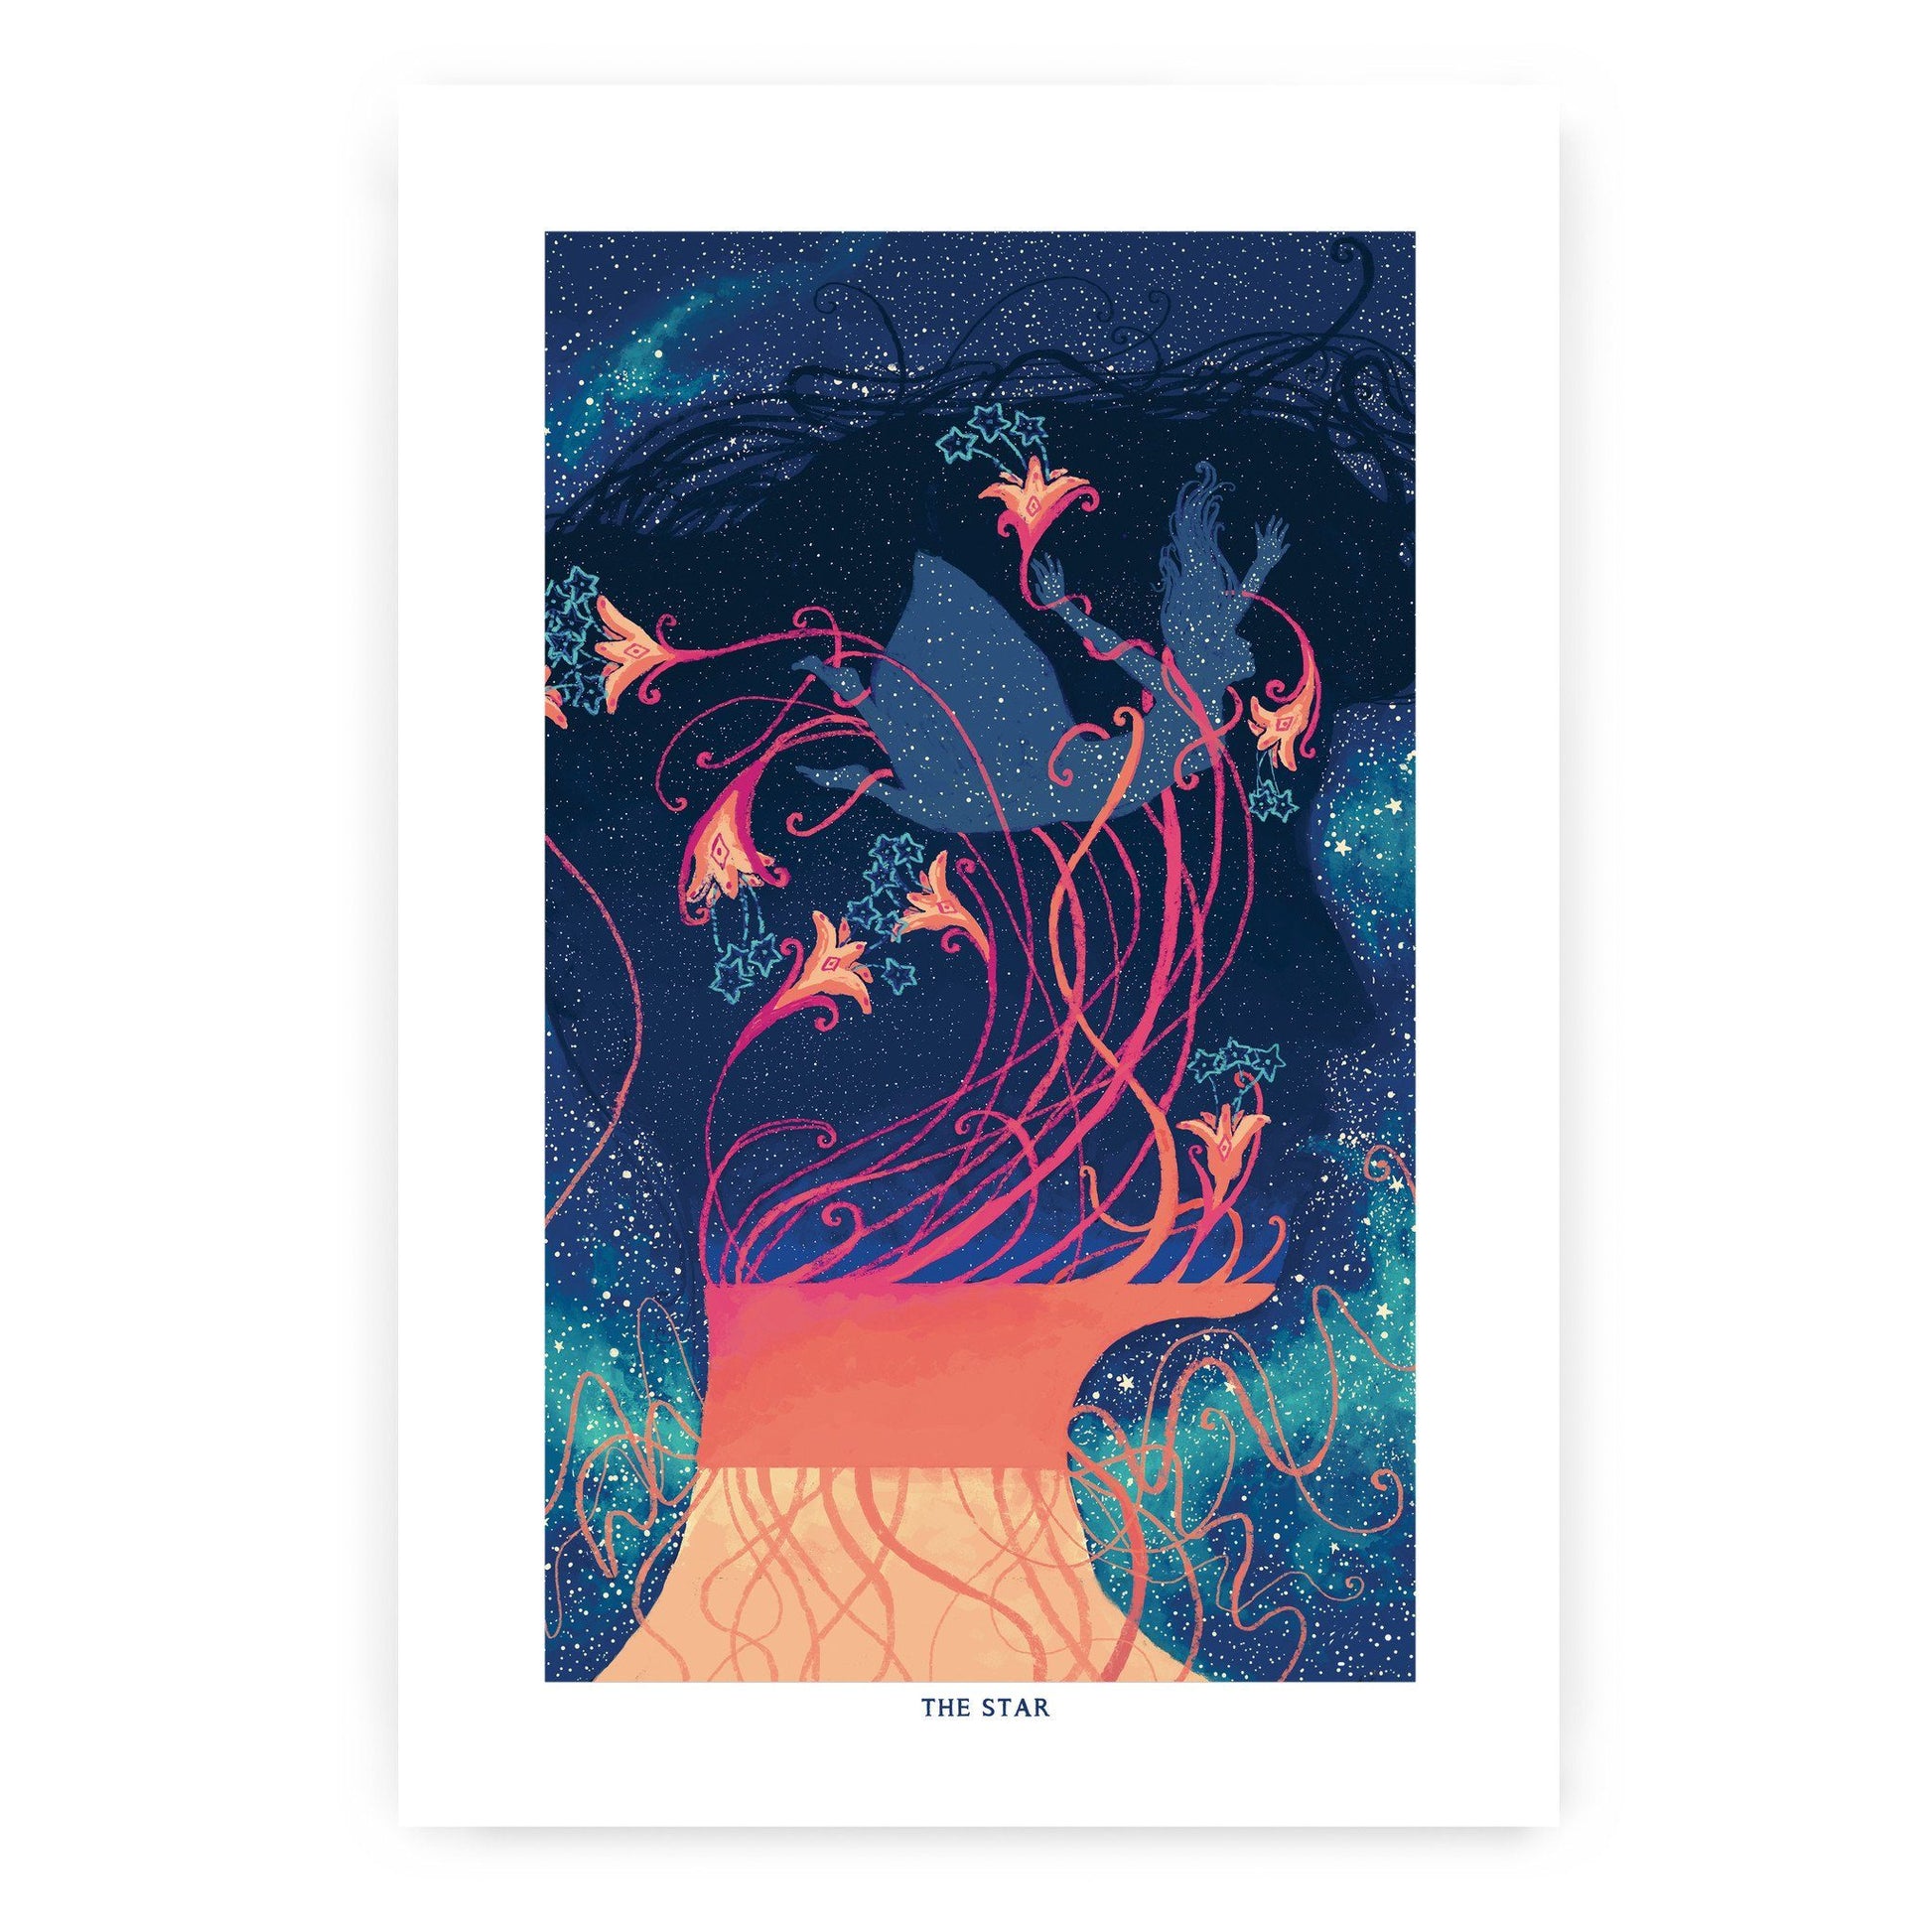 The Star (Limited Edition of 200) Print James R. Eads